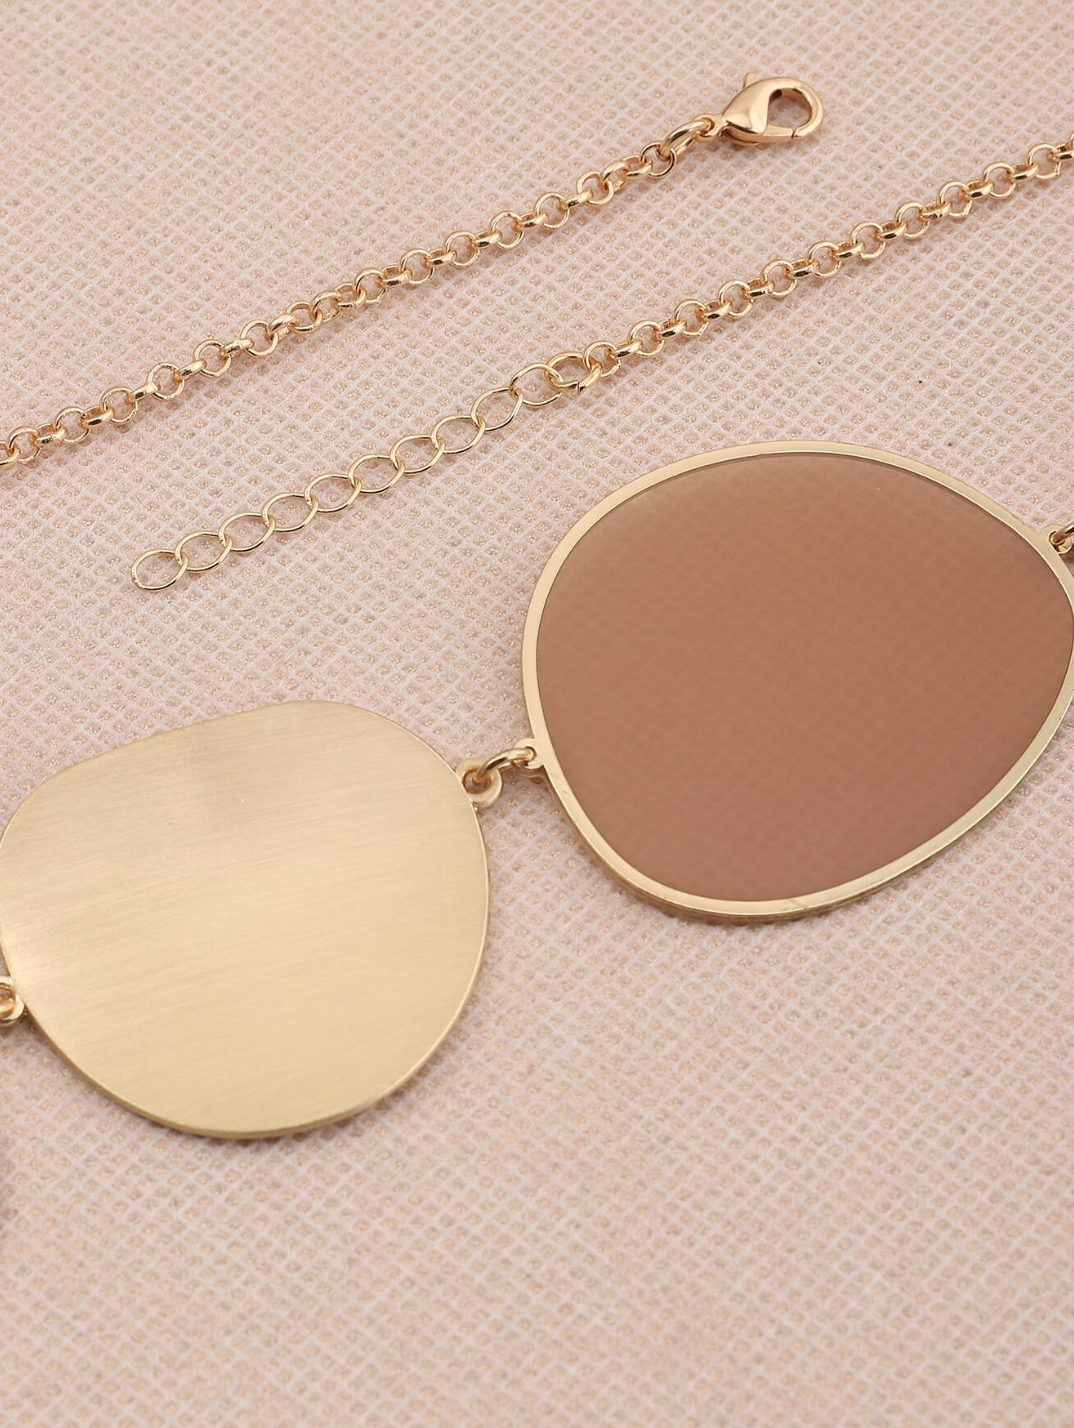 1pc Fashionable simple style Round Disc Smooth Surface Women's Necklace